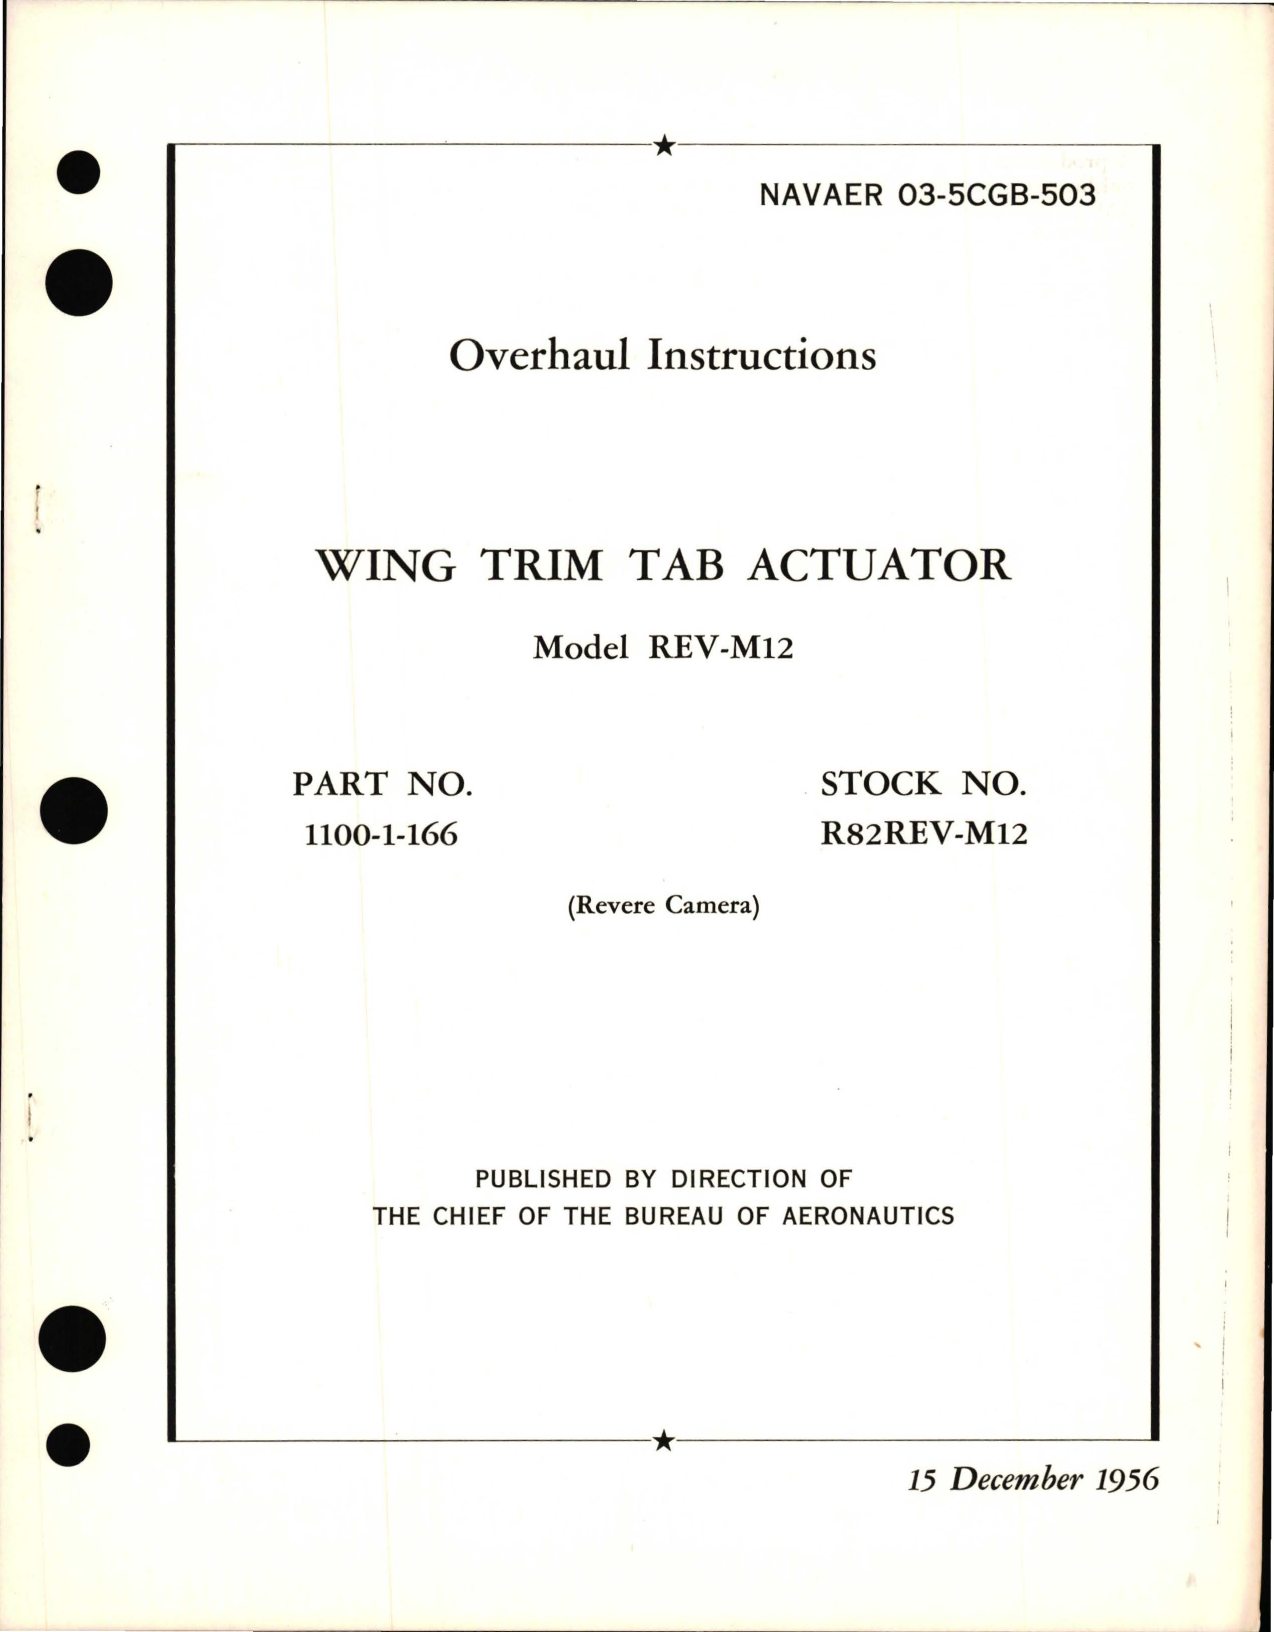 Sample page 1 from AirCorps Library document: Overhaul Instructions for Wing Trim Tab Actuator Model REV-M12 - Part 1100-1-166 